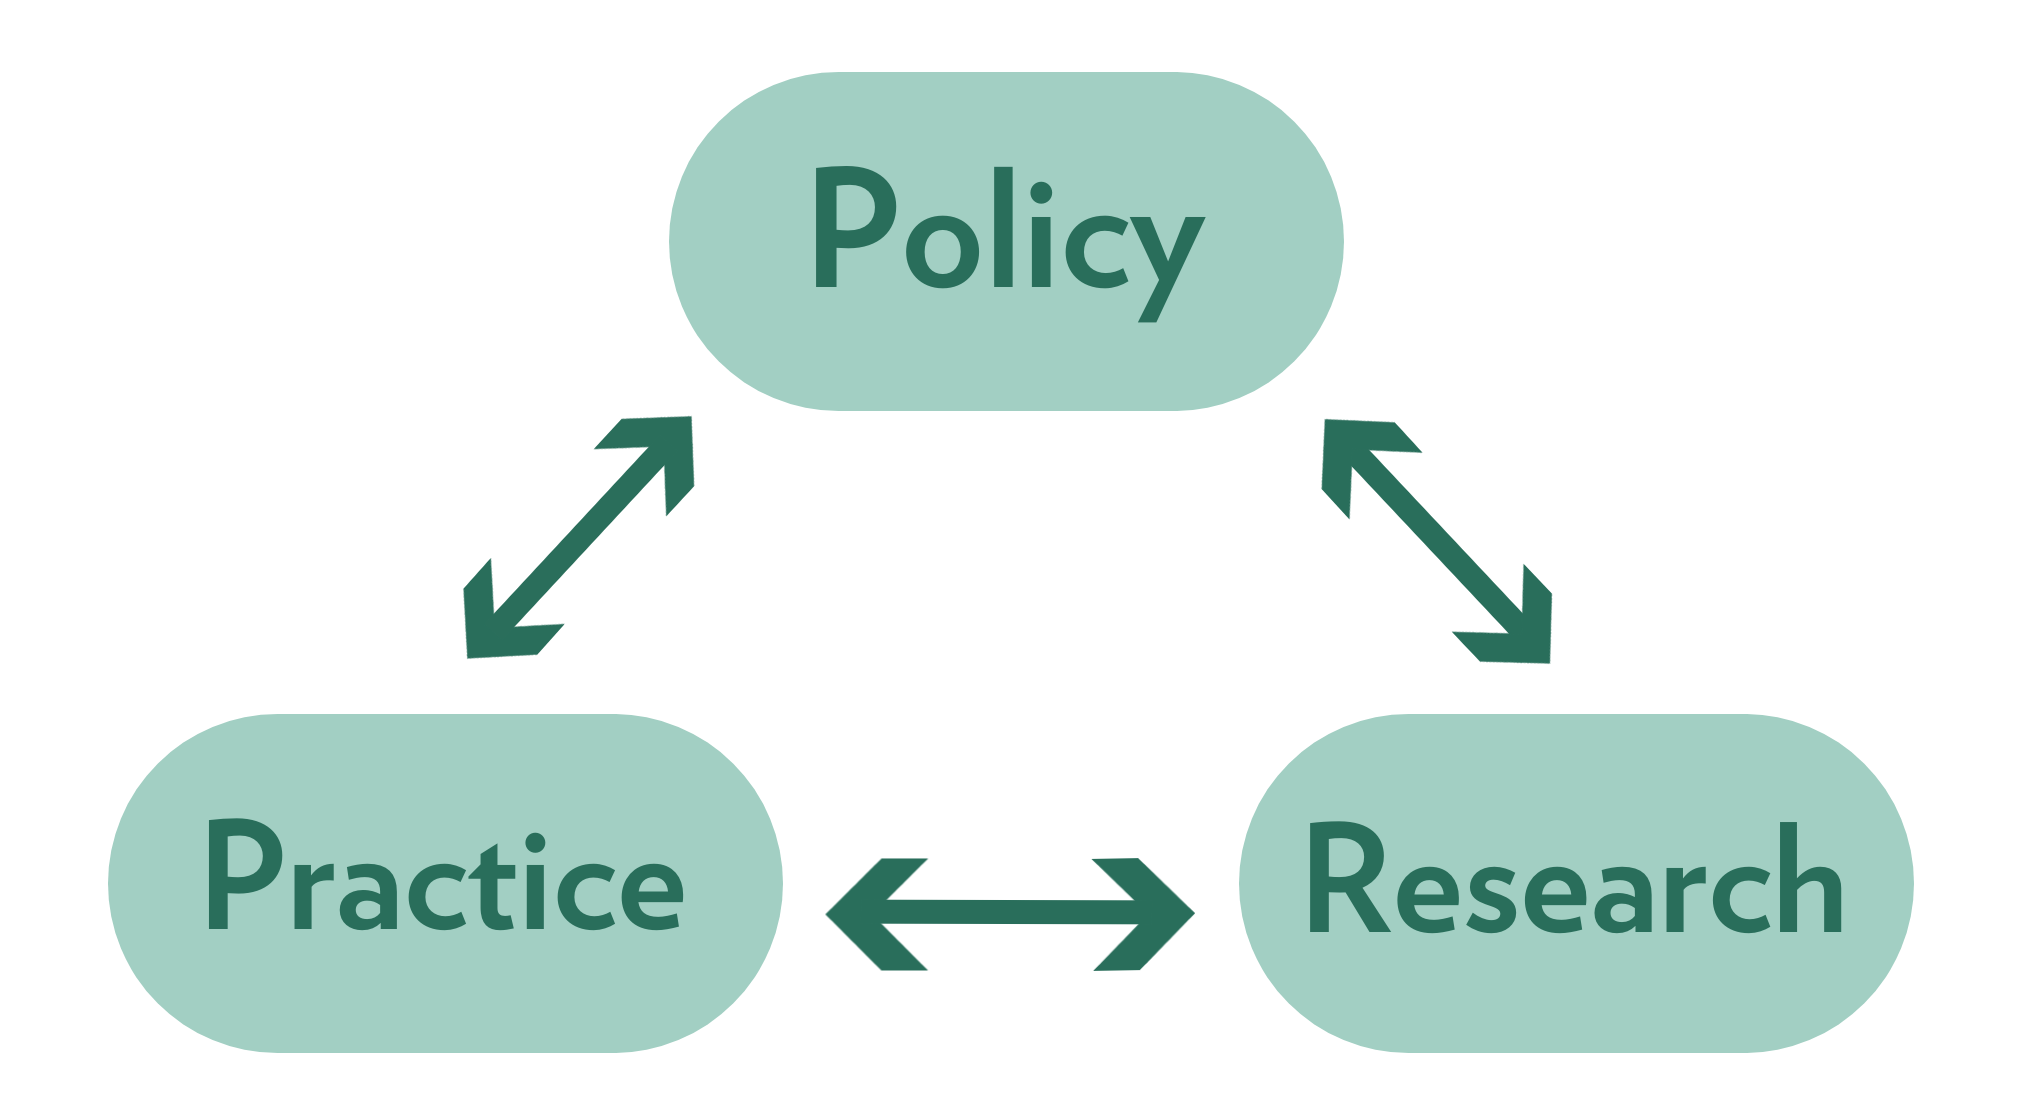 A green flowchart that shows a cycle of three concepts, flowing between Policy, Practice, and Research.